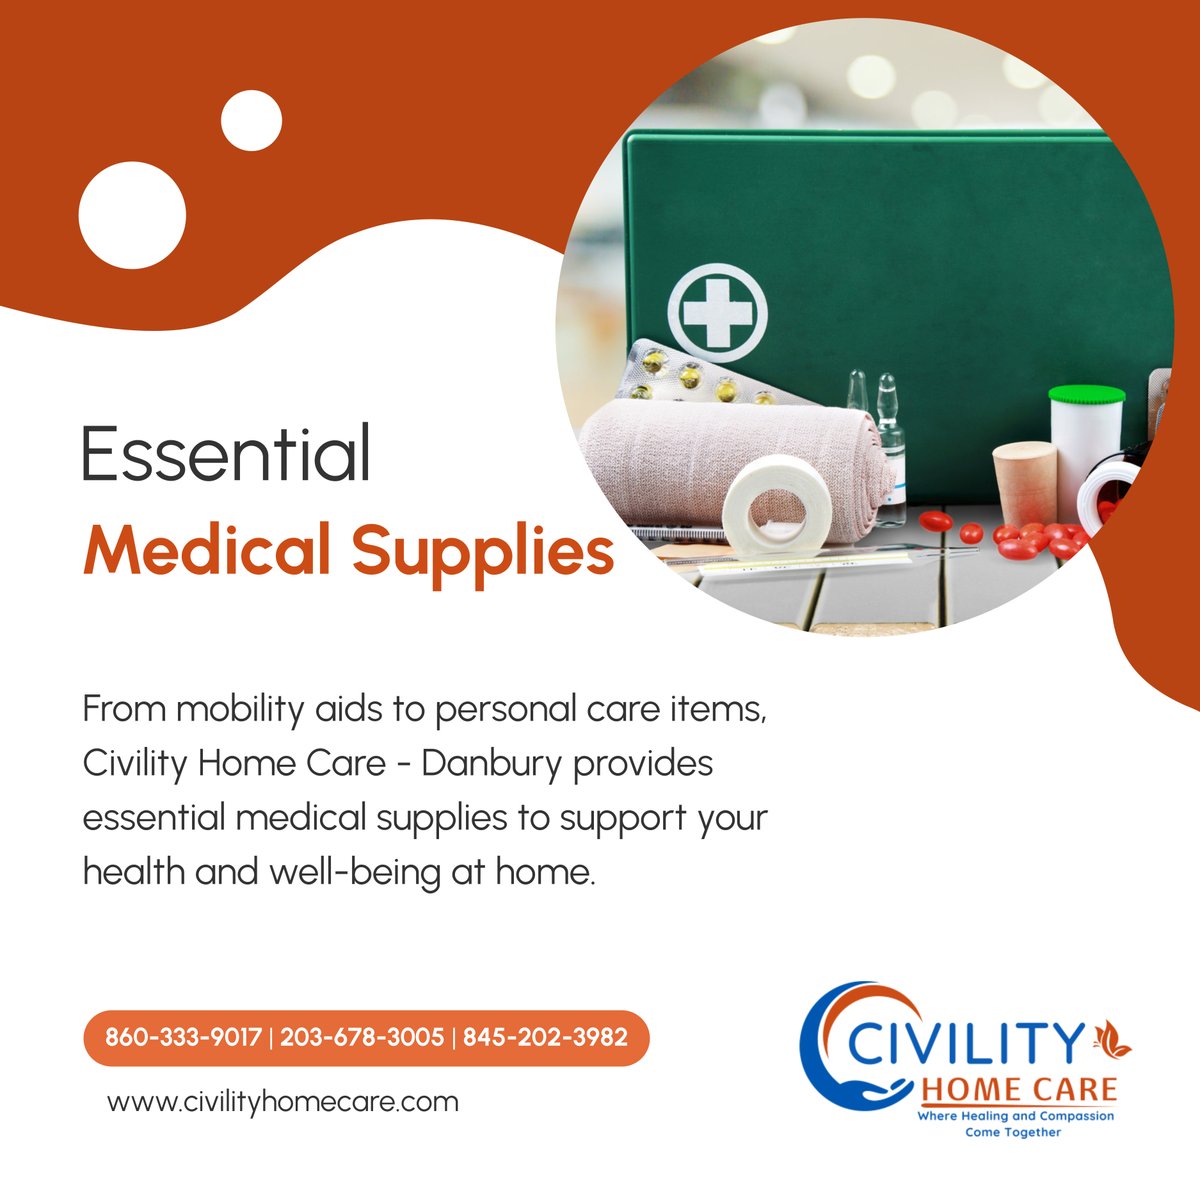 Explore our range of medical supplies tailored to meet your needs, ensuring comfort and independence in your daily life. 

#BrewsterNY #HomeCareAndMedicalSupplies #MedicalSupplies #HealthcareProducts #EssentialSupplies